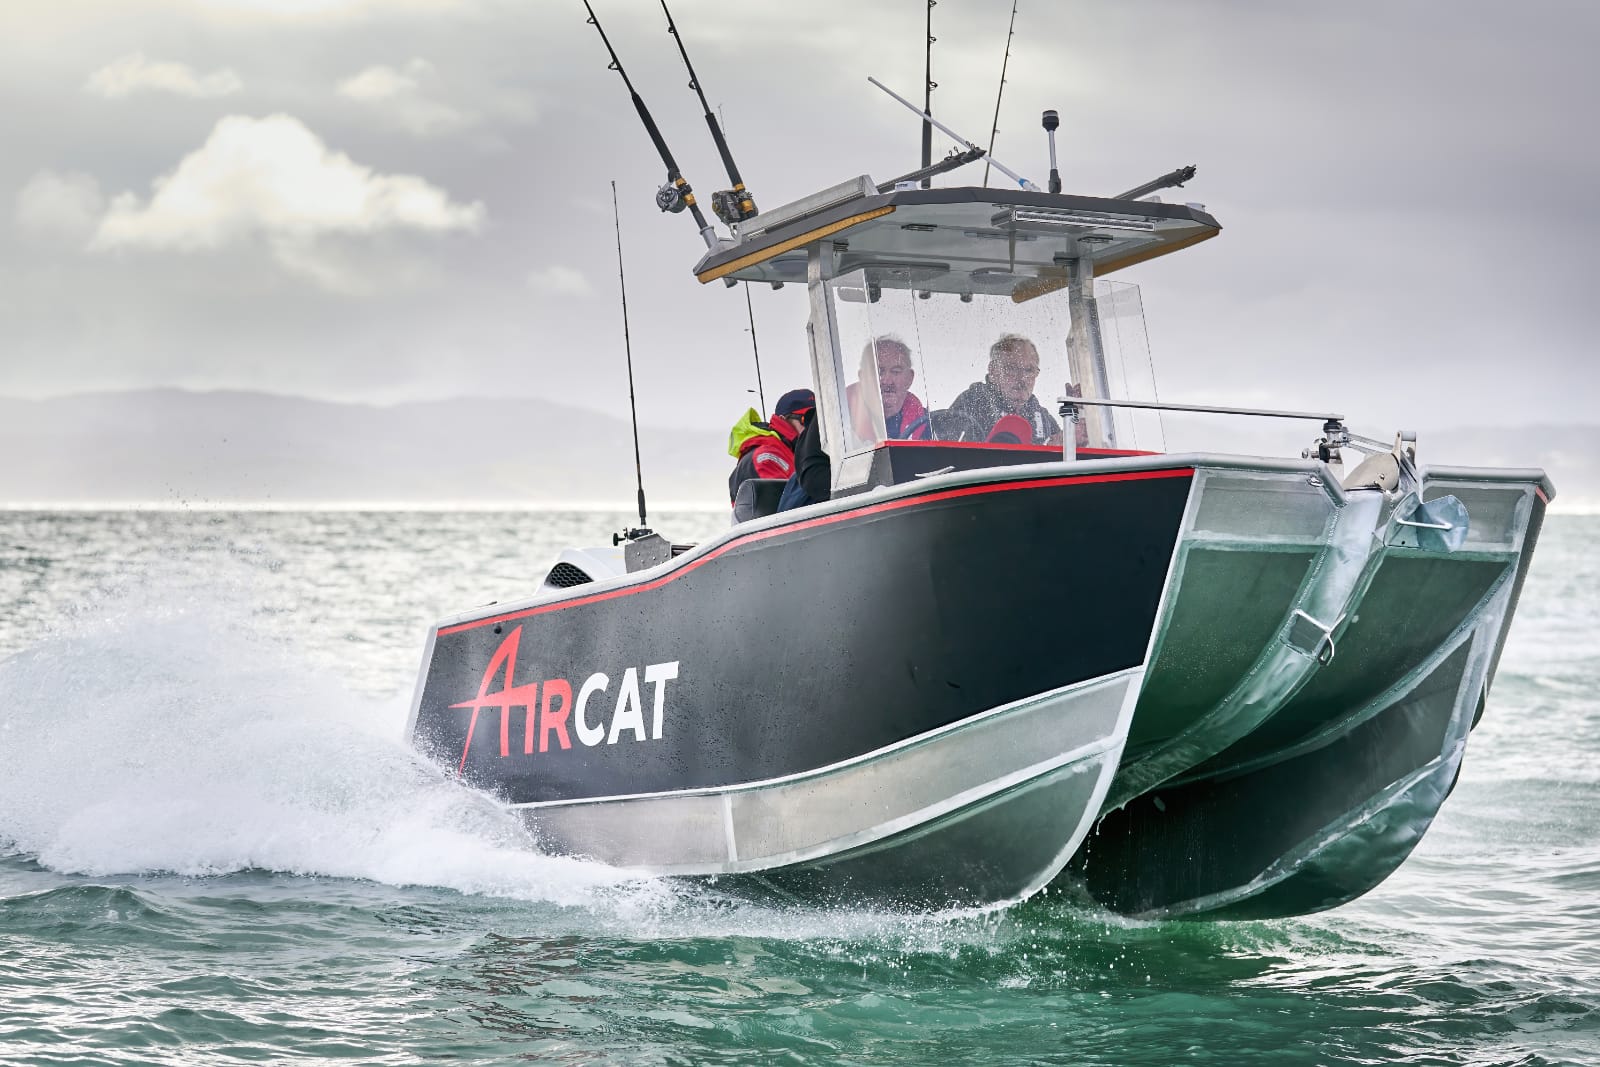 The AirCat 625 is Now Available for Demonstrations and Sea Trials